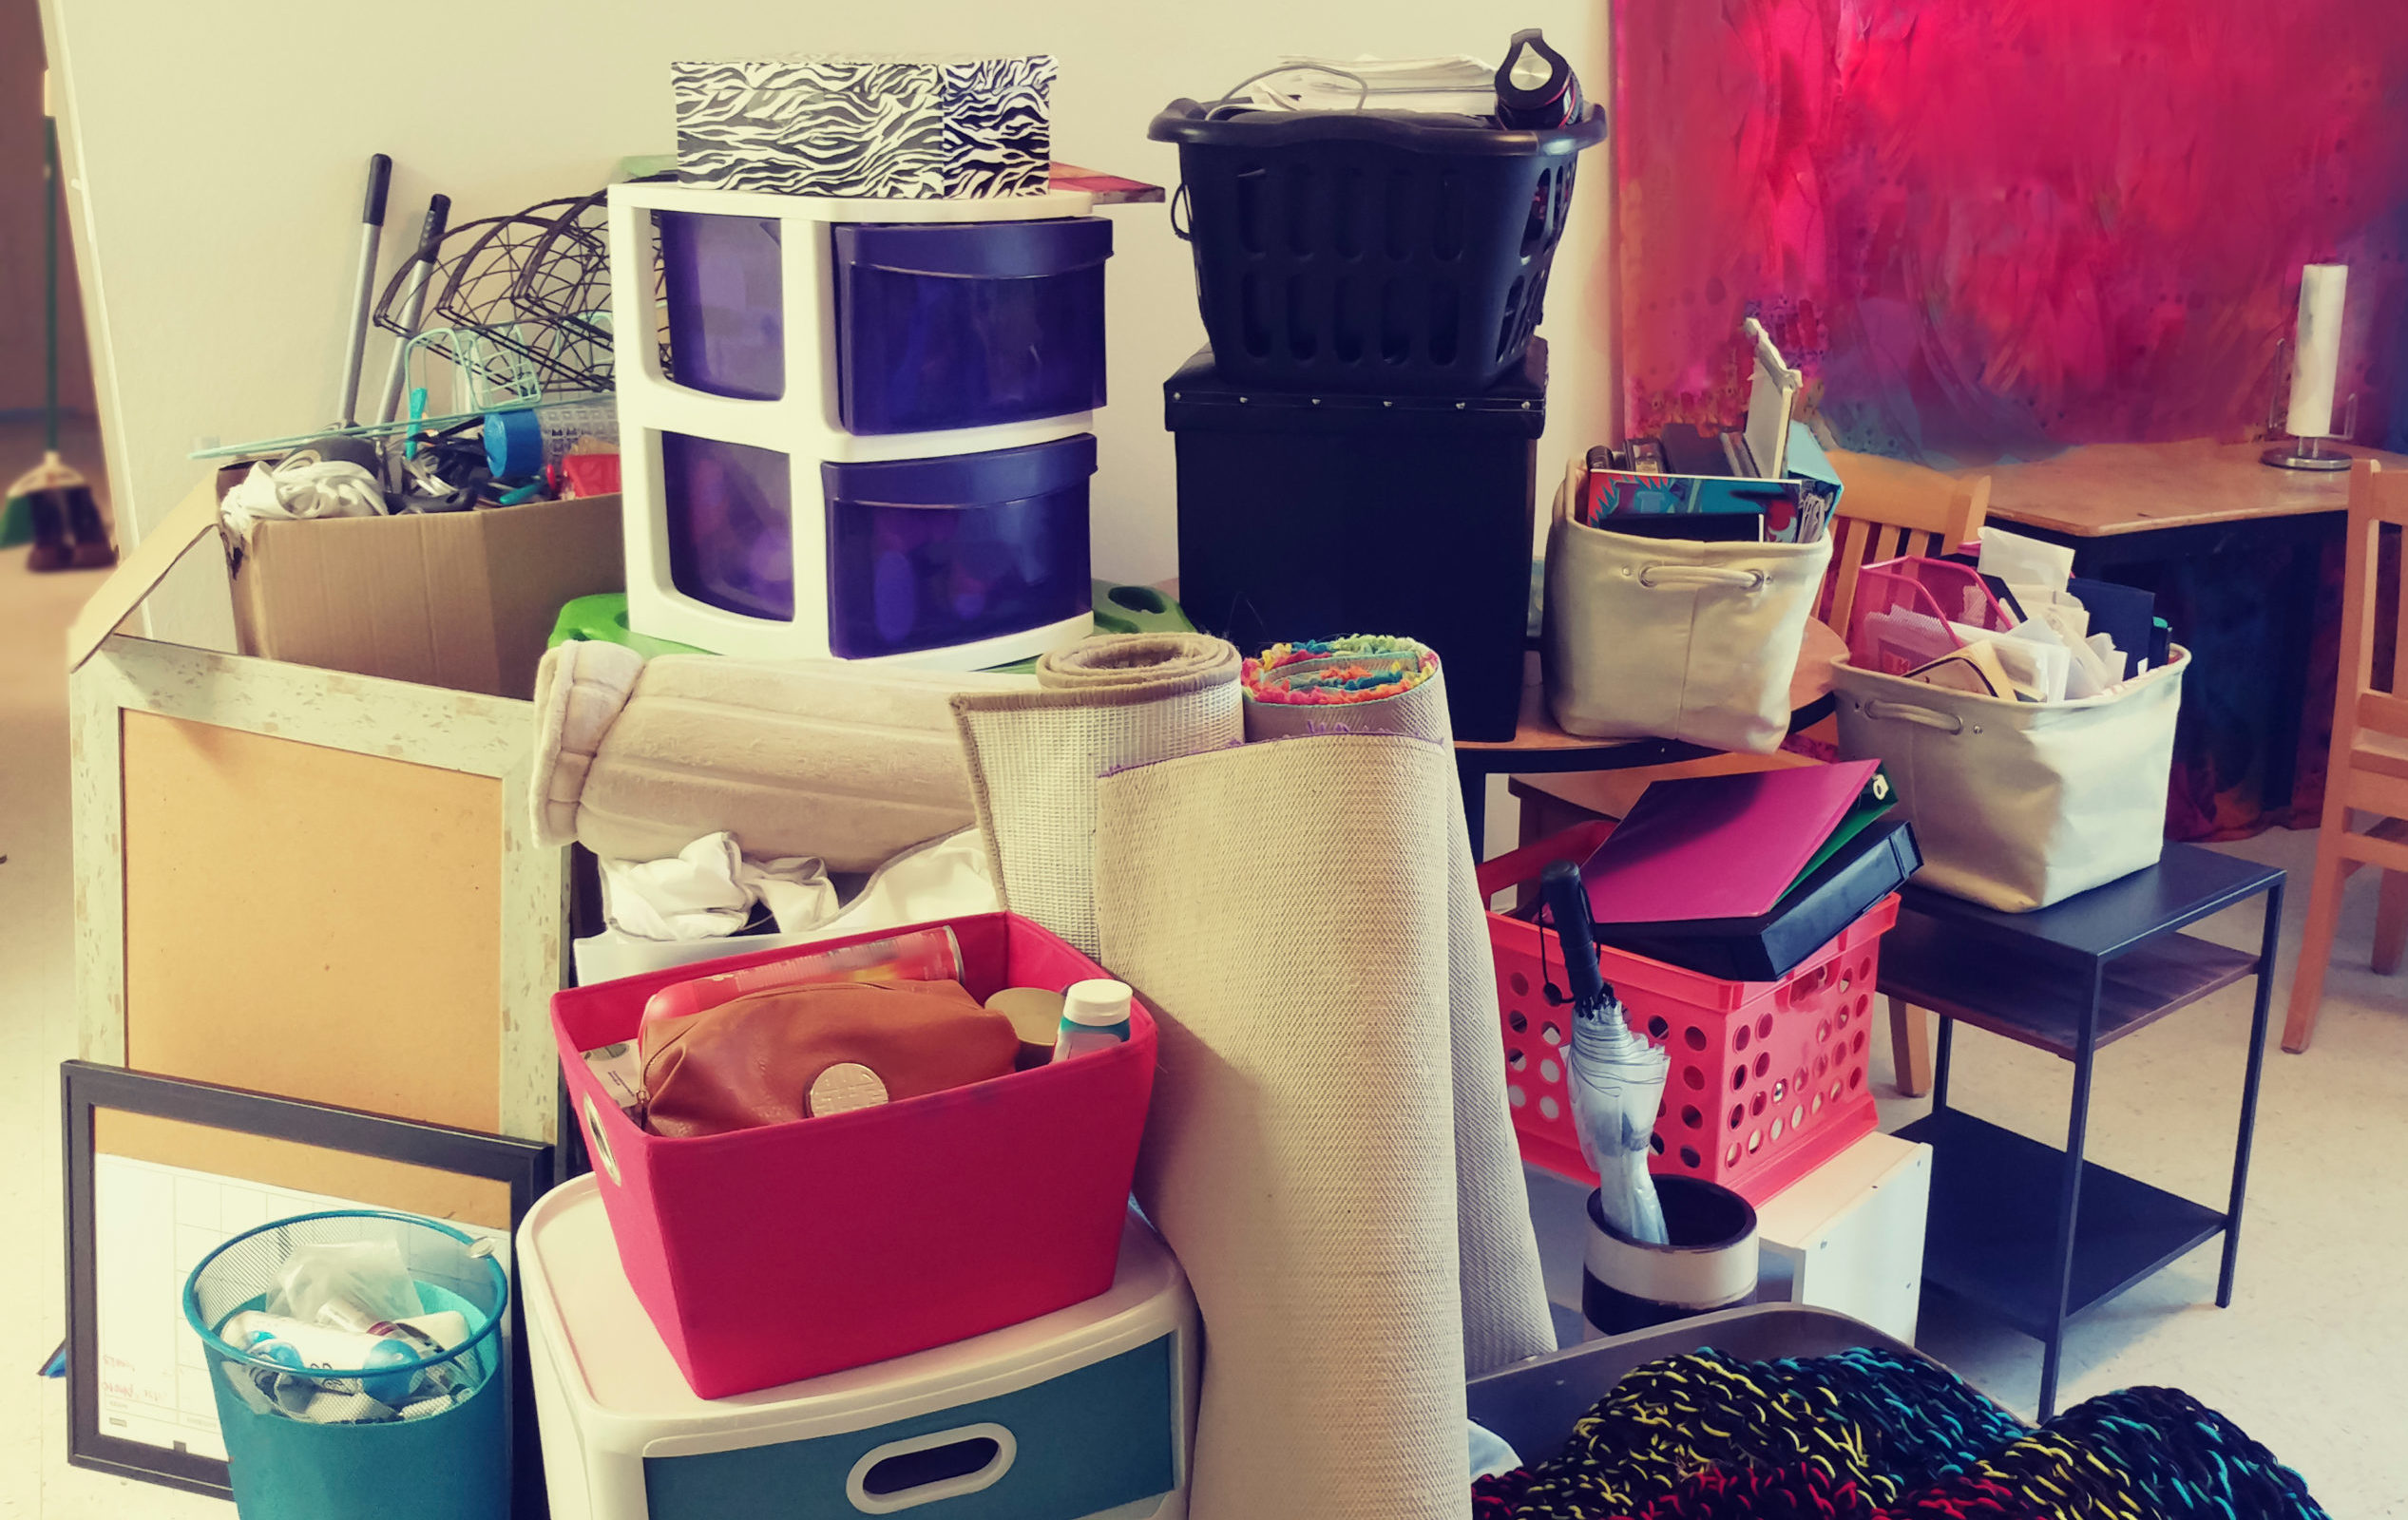 College,Moving,Day,,Pile,Of,Stuff,,Pink,And,Teal.